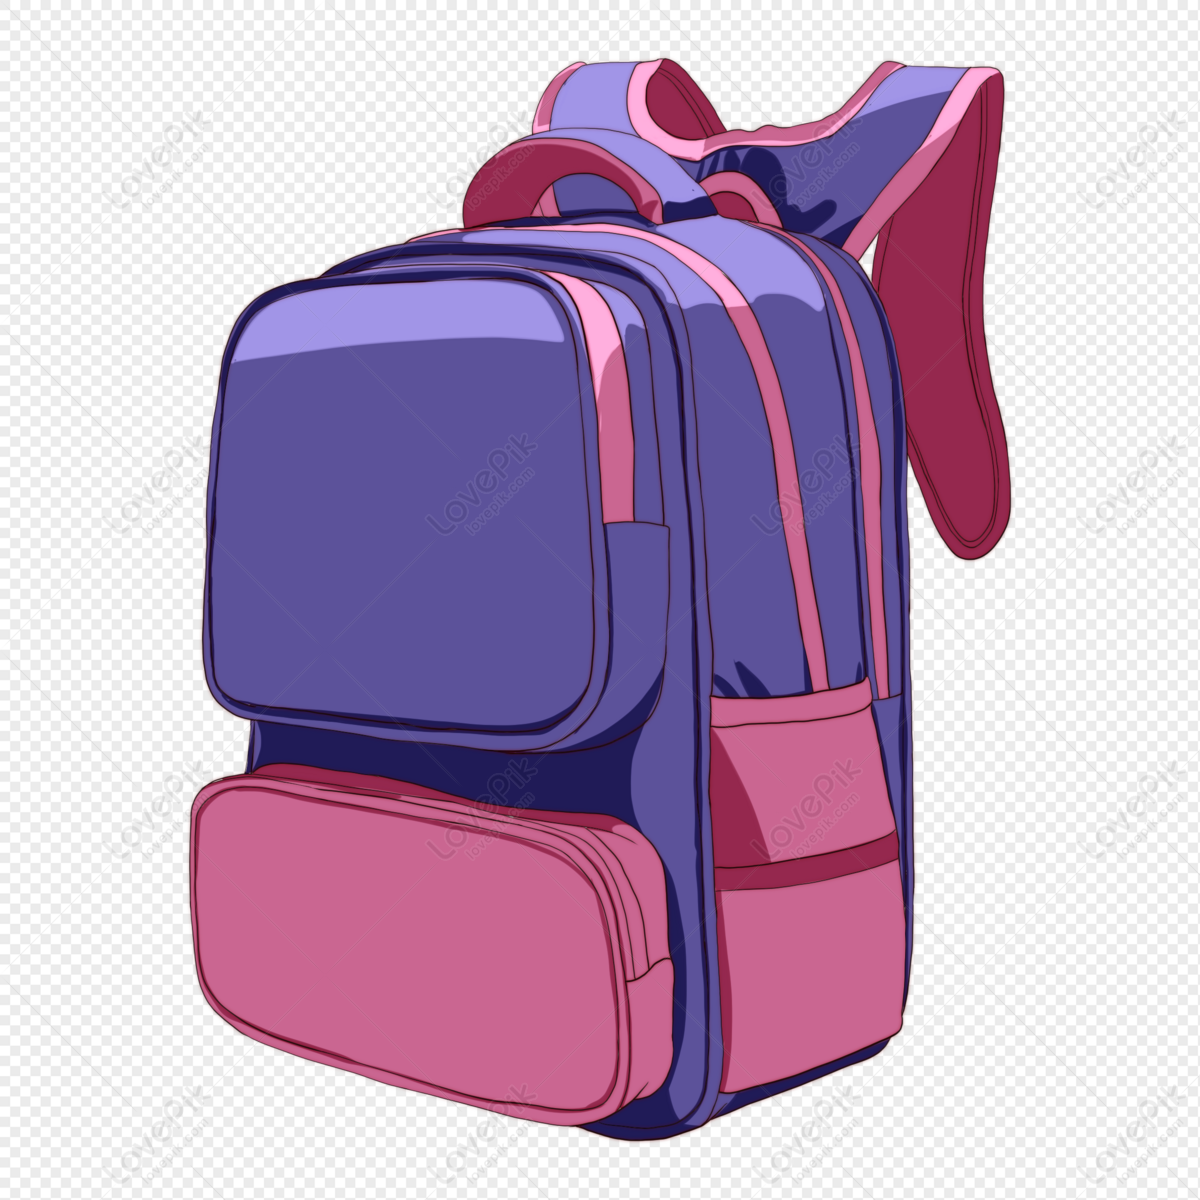 Purple Backpack Clipart Images | Free Download | PNG Transparent - Clip ...